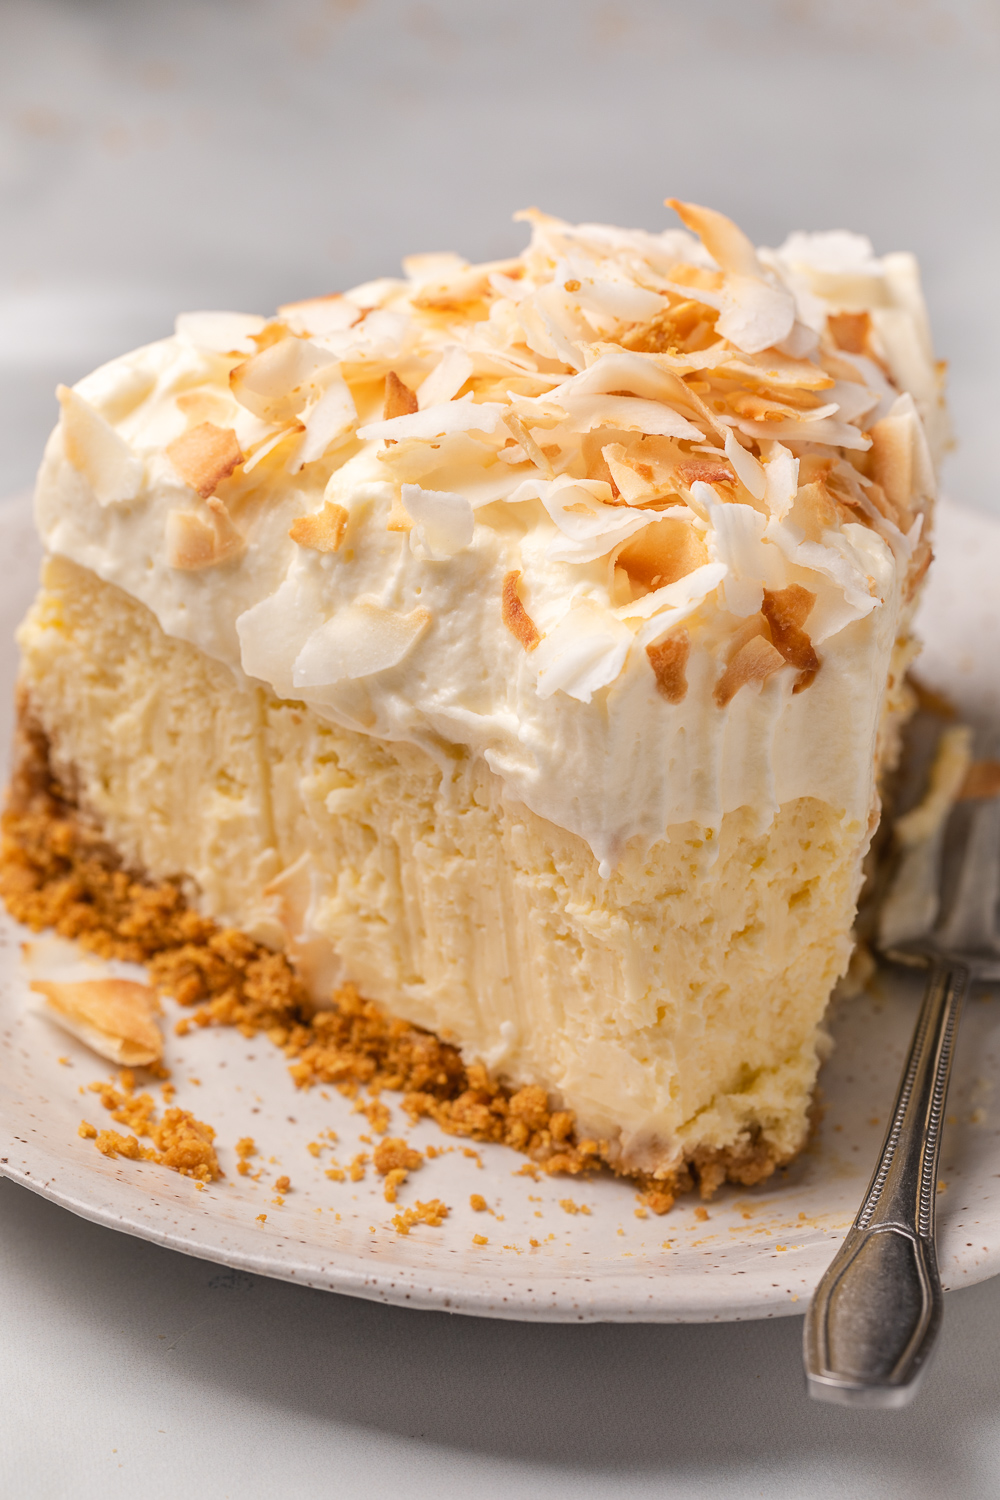 This Creamy Coconut Cheesecake is made with coconut milk, coconut extract, and shredded coconut, so you know it's loaded with refreshing coconut flavor! The crunchy graham cracker crust is the perfect contrast to the creamy filling and fluffy whipped cream topping. A must try for coconut lovers!